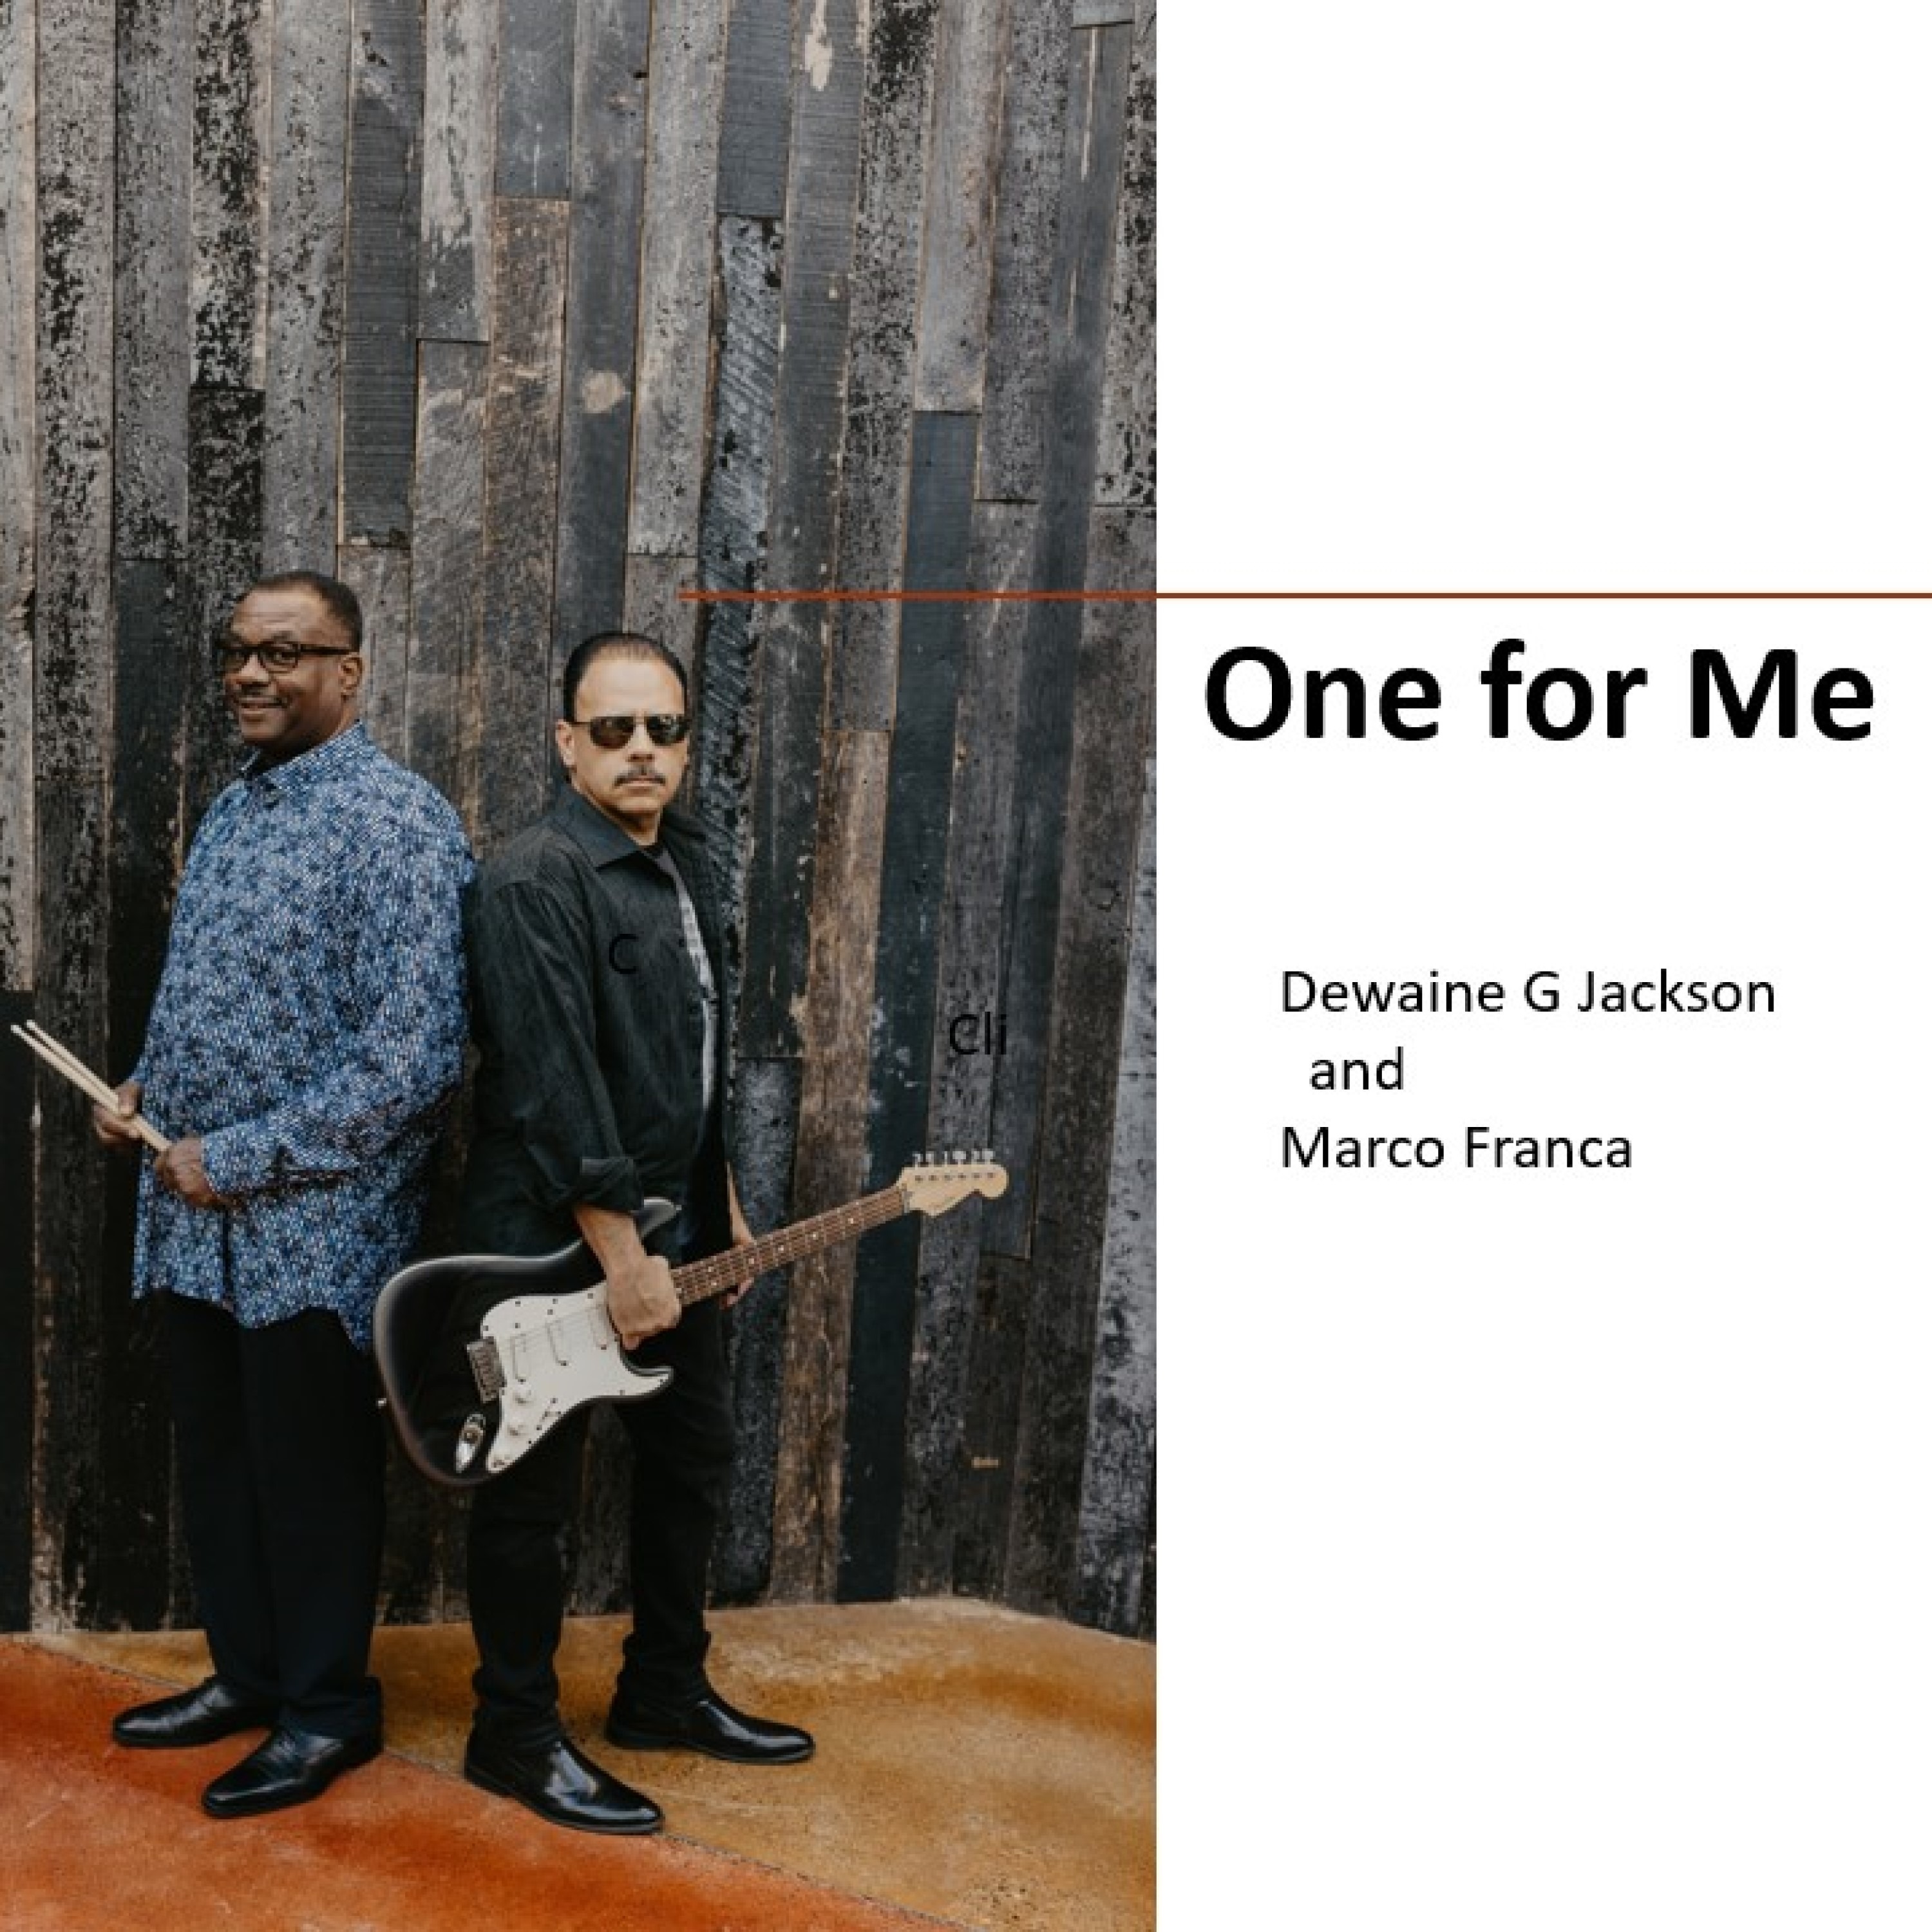 Hopeful and Intimate R&B Music: Dewaine G Jackson and Marco Franca Release An Exciting New Single On Keeping Love Close.